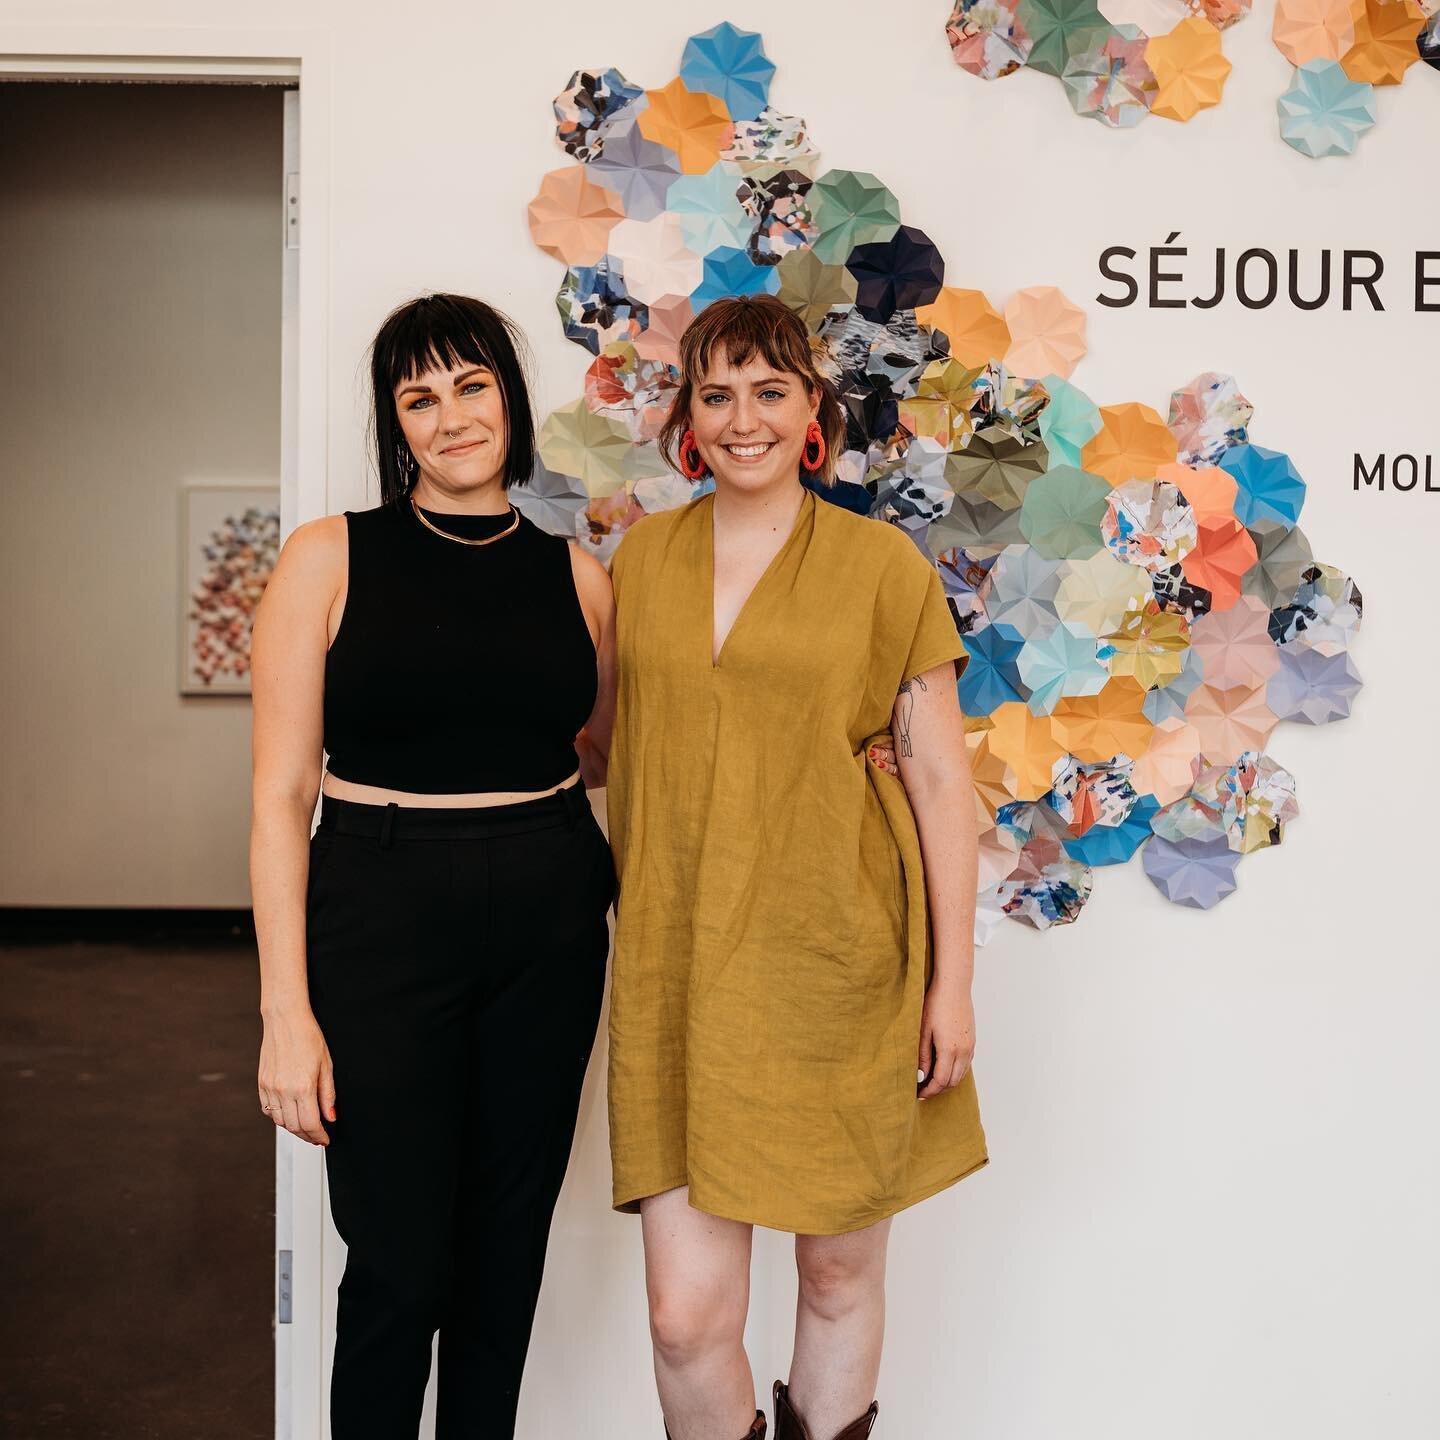 Did you know @mollyknobloch have a collab piece in S&eacute;jour en Couleur? This piece, entitled &laquo;&nbsp;Elles n&rsquo;aiment pas le violet&nbsp;&raquo; uses paper that are actually prints of some of Molly&rsquo;s paintings along with pops of c